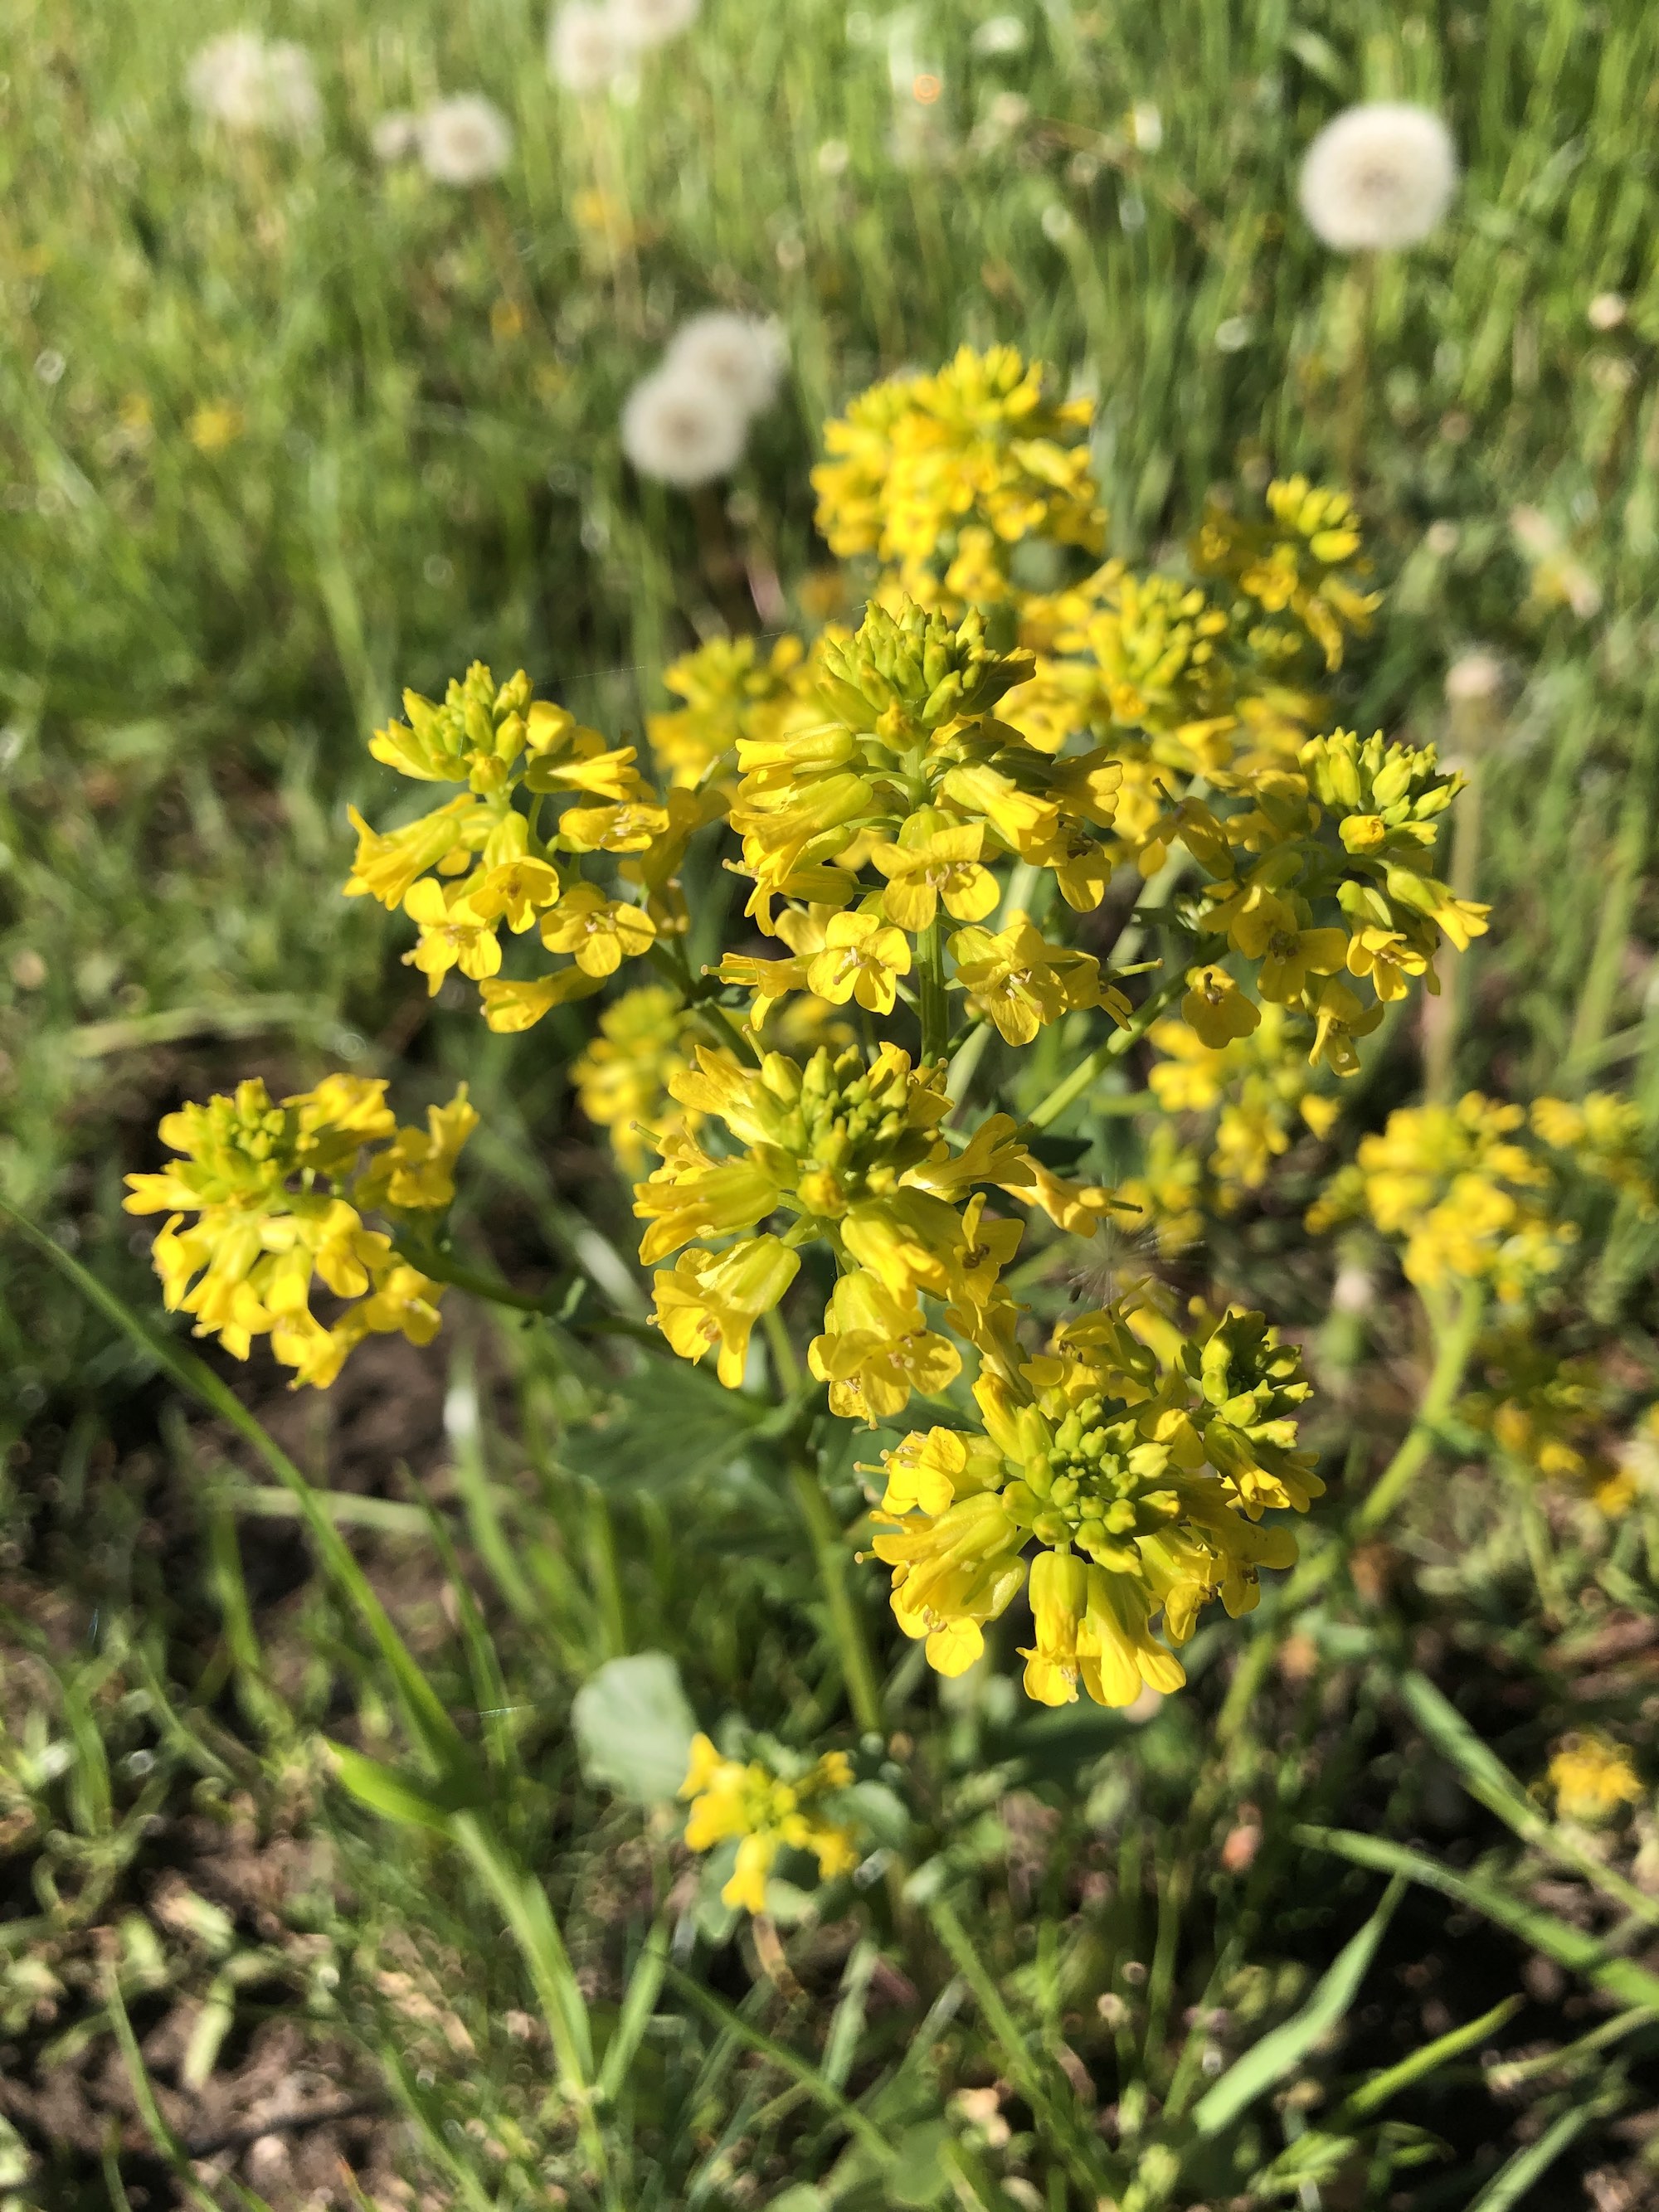 Garden Yellow Rocket in Marion Dunn prairie in Madison, Wisconsin on May 5, 2021.